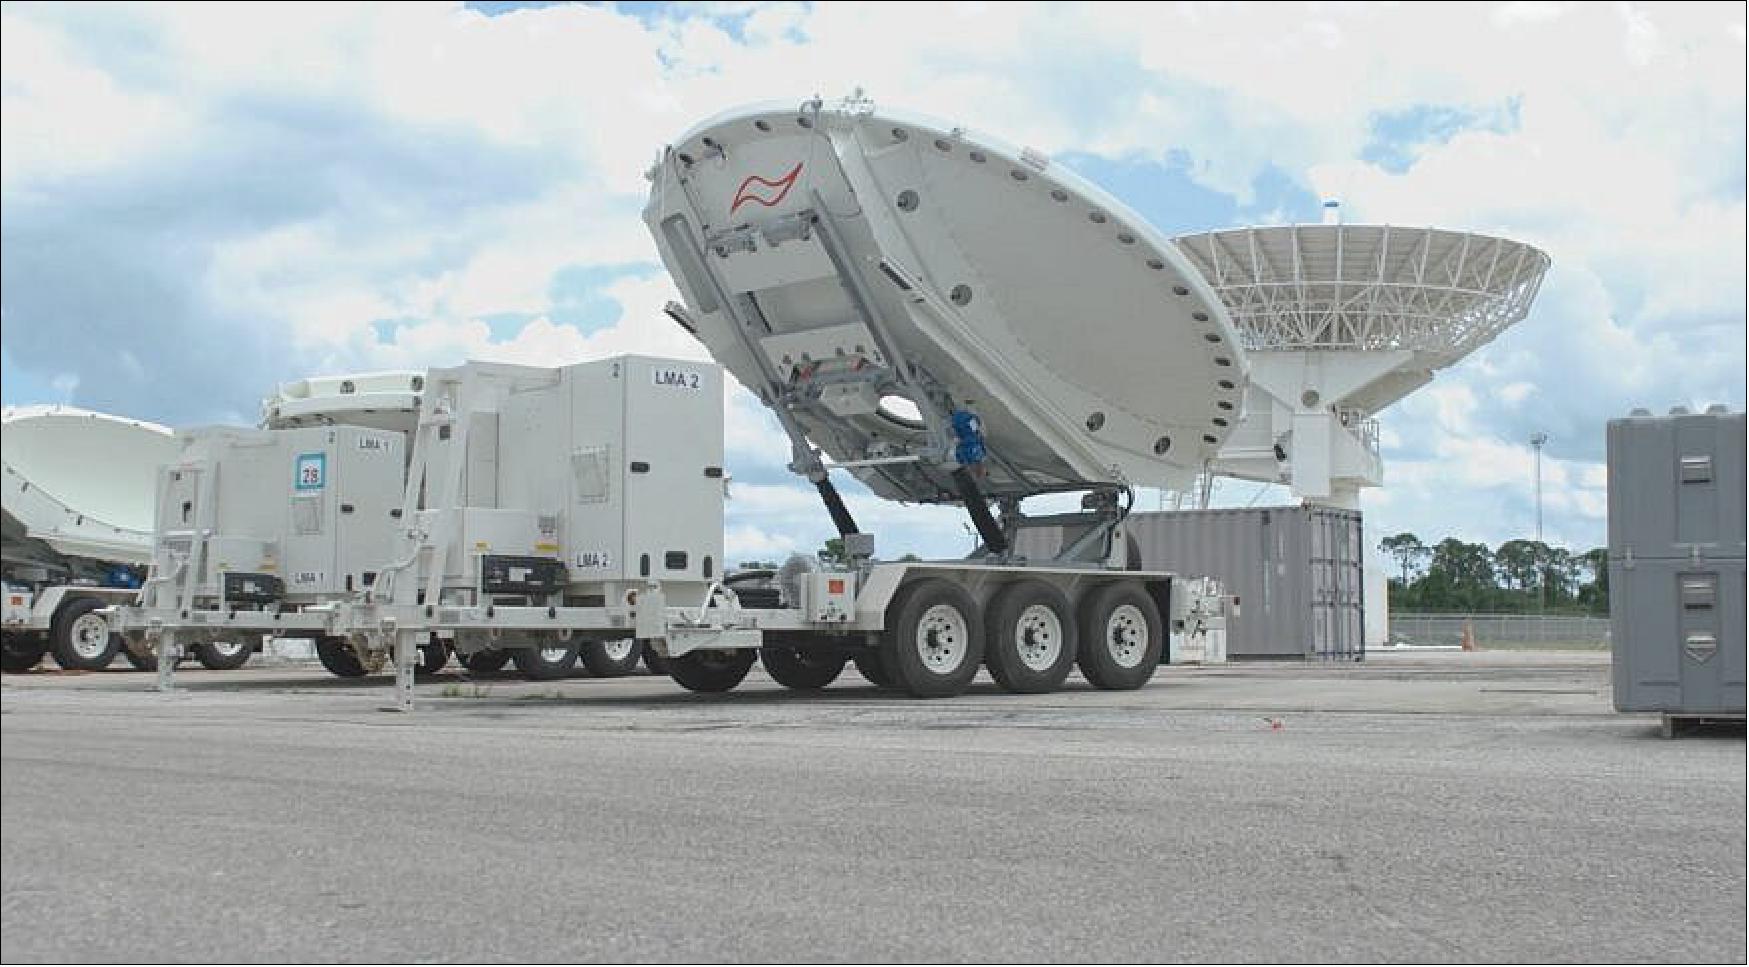 Figure 44: Satellite antennas used in the Counter Communications System 10.2 electronic jammer developed by L3Harris under contract to the U.S. Space Force (image credit: L3Harris)